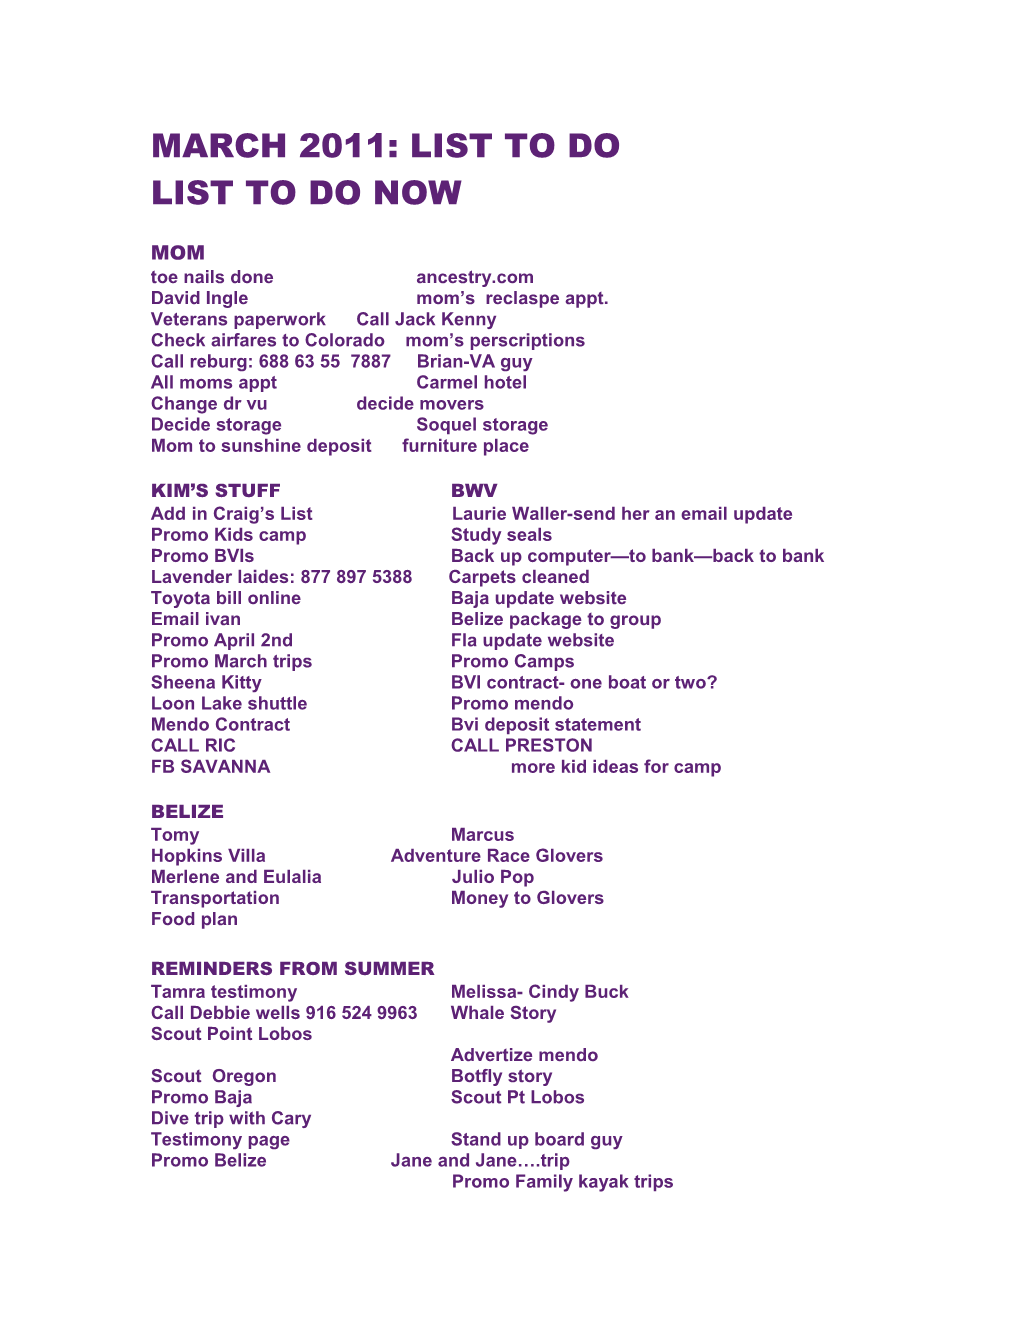 Late Spring 2009: LIST to DO